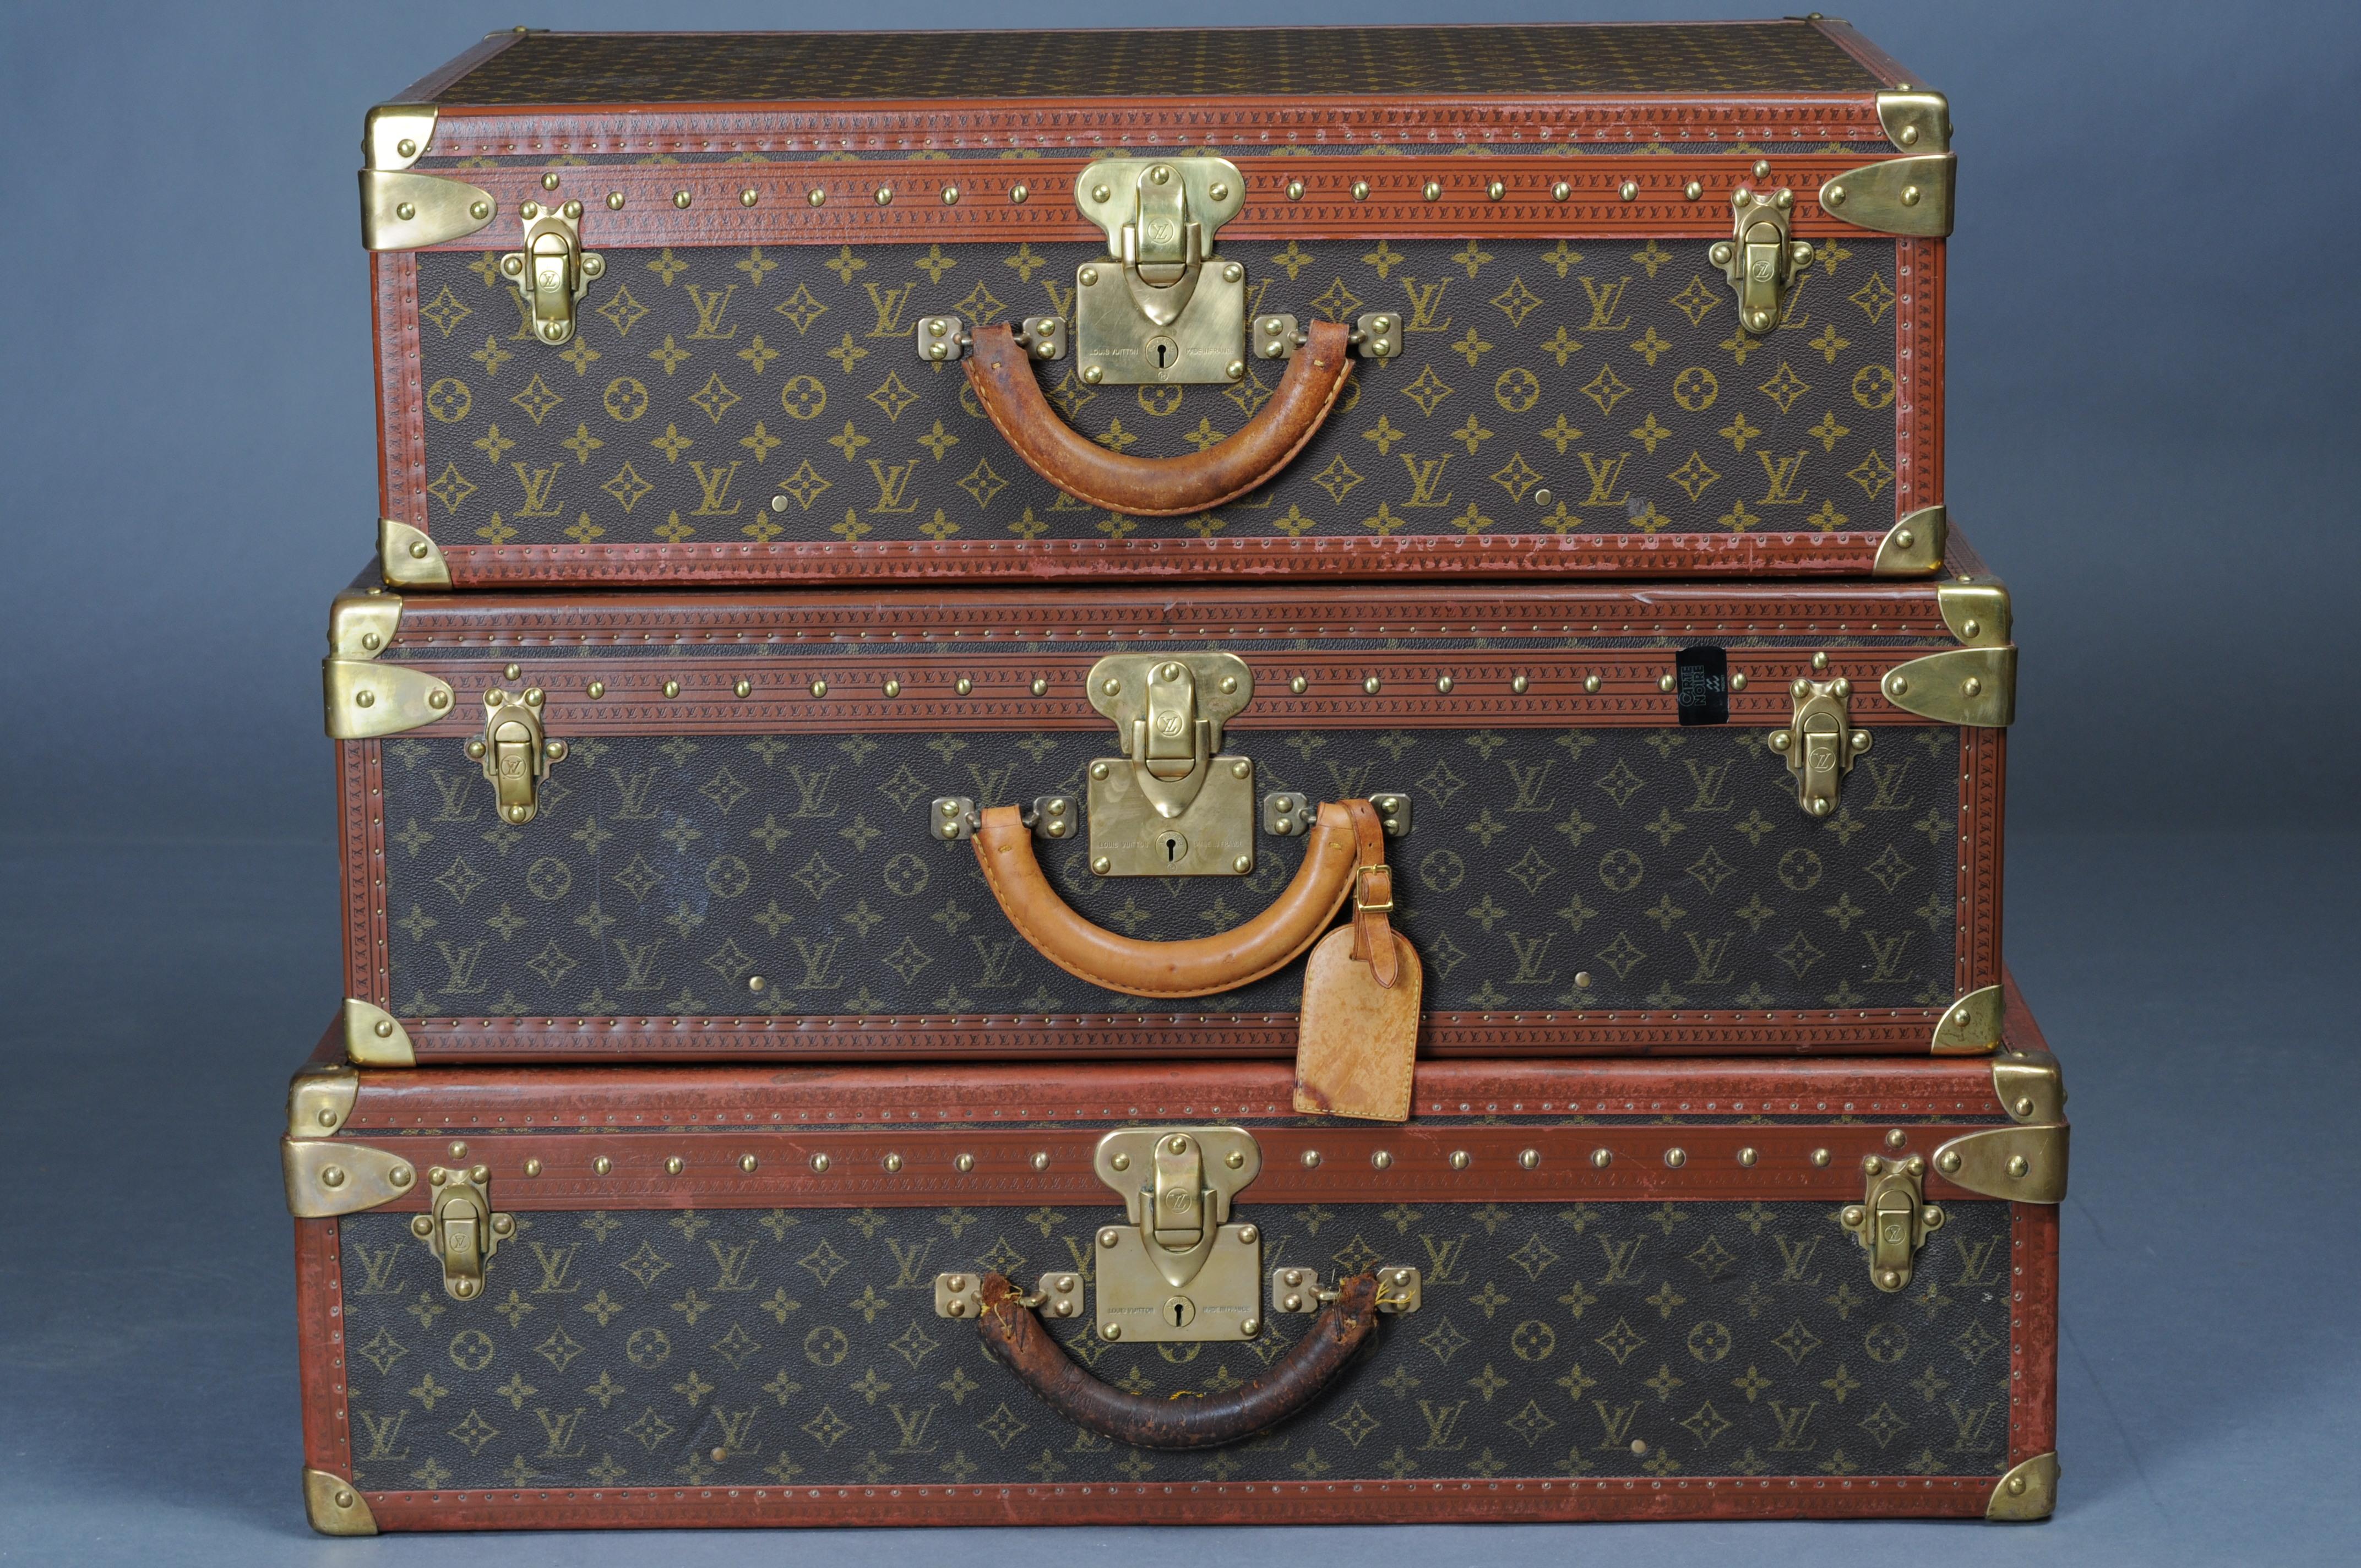 collection of 3 suitcases
Alzer model
The suitcases are very suitable as decoration
3 different sizes
Width 80 cm, 75 cm, 70 cm
The suitcases are in historically good condition.
Come from the 1970s-1990s
